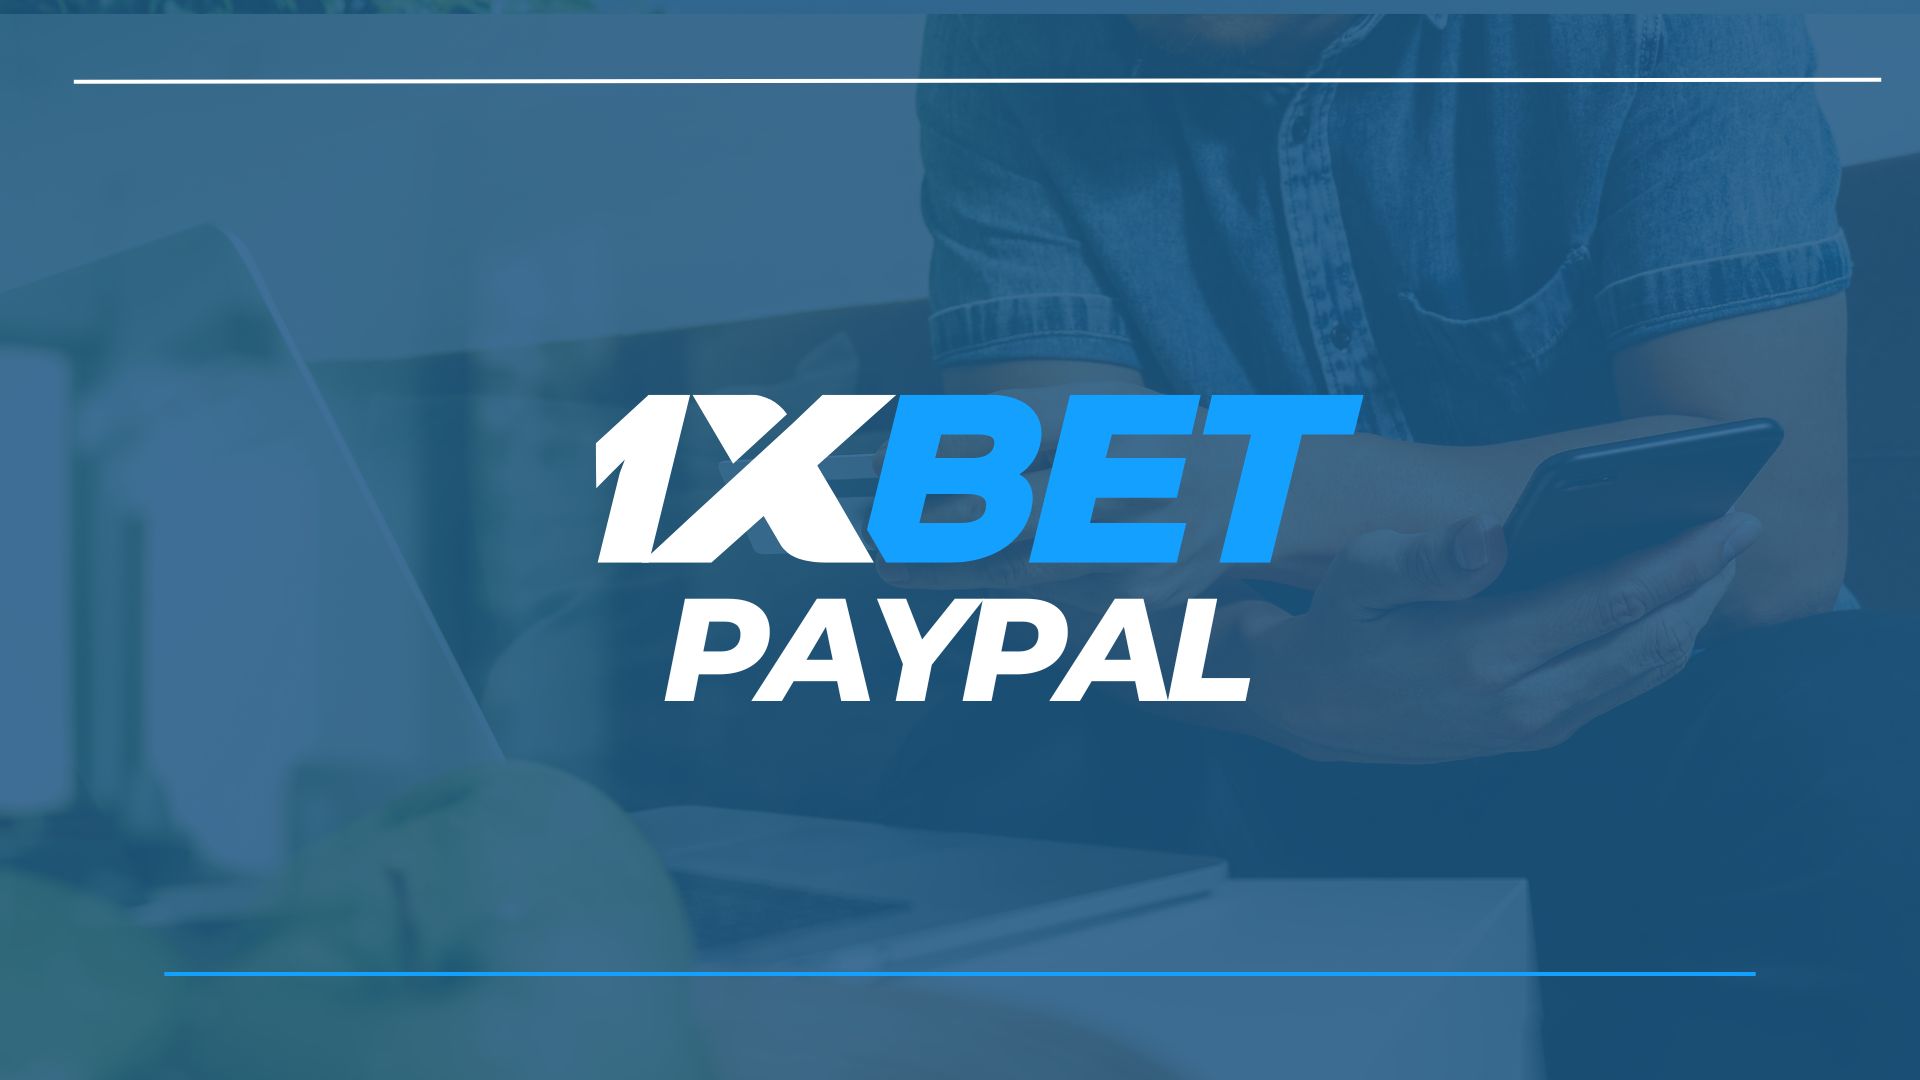 1xbet Paypal